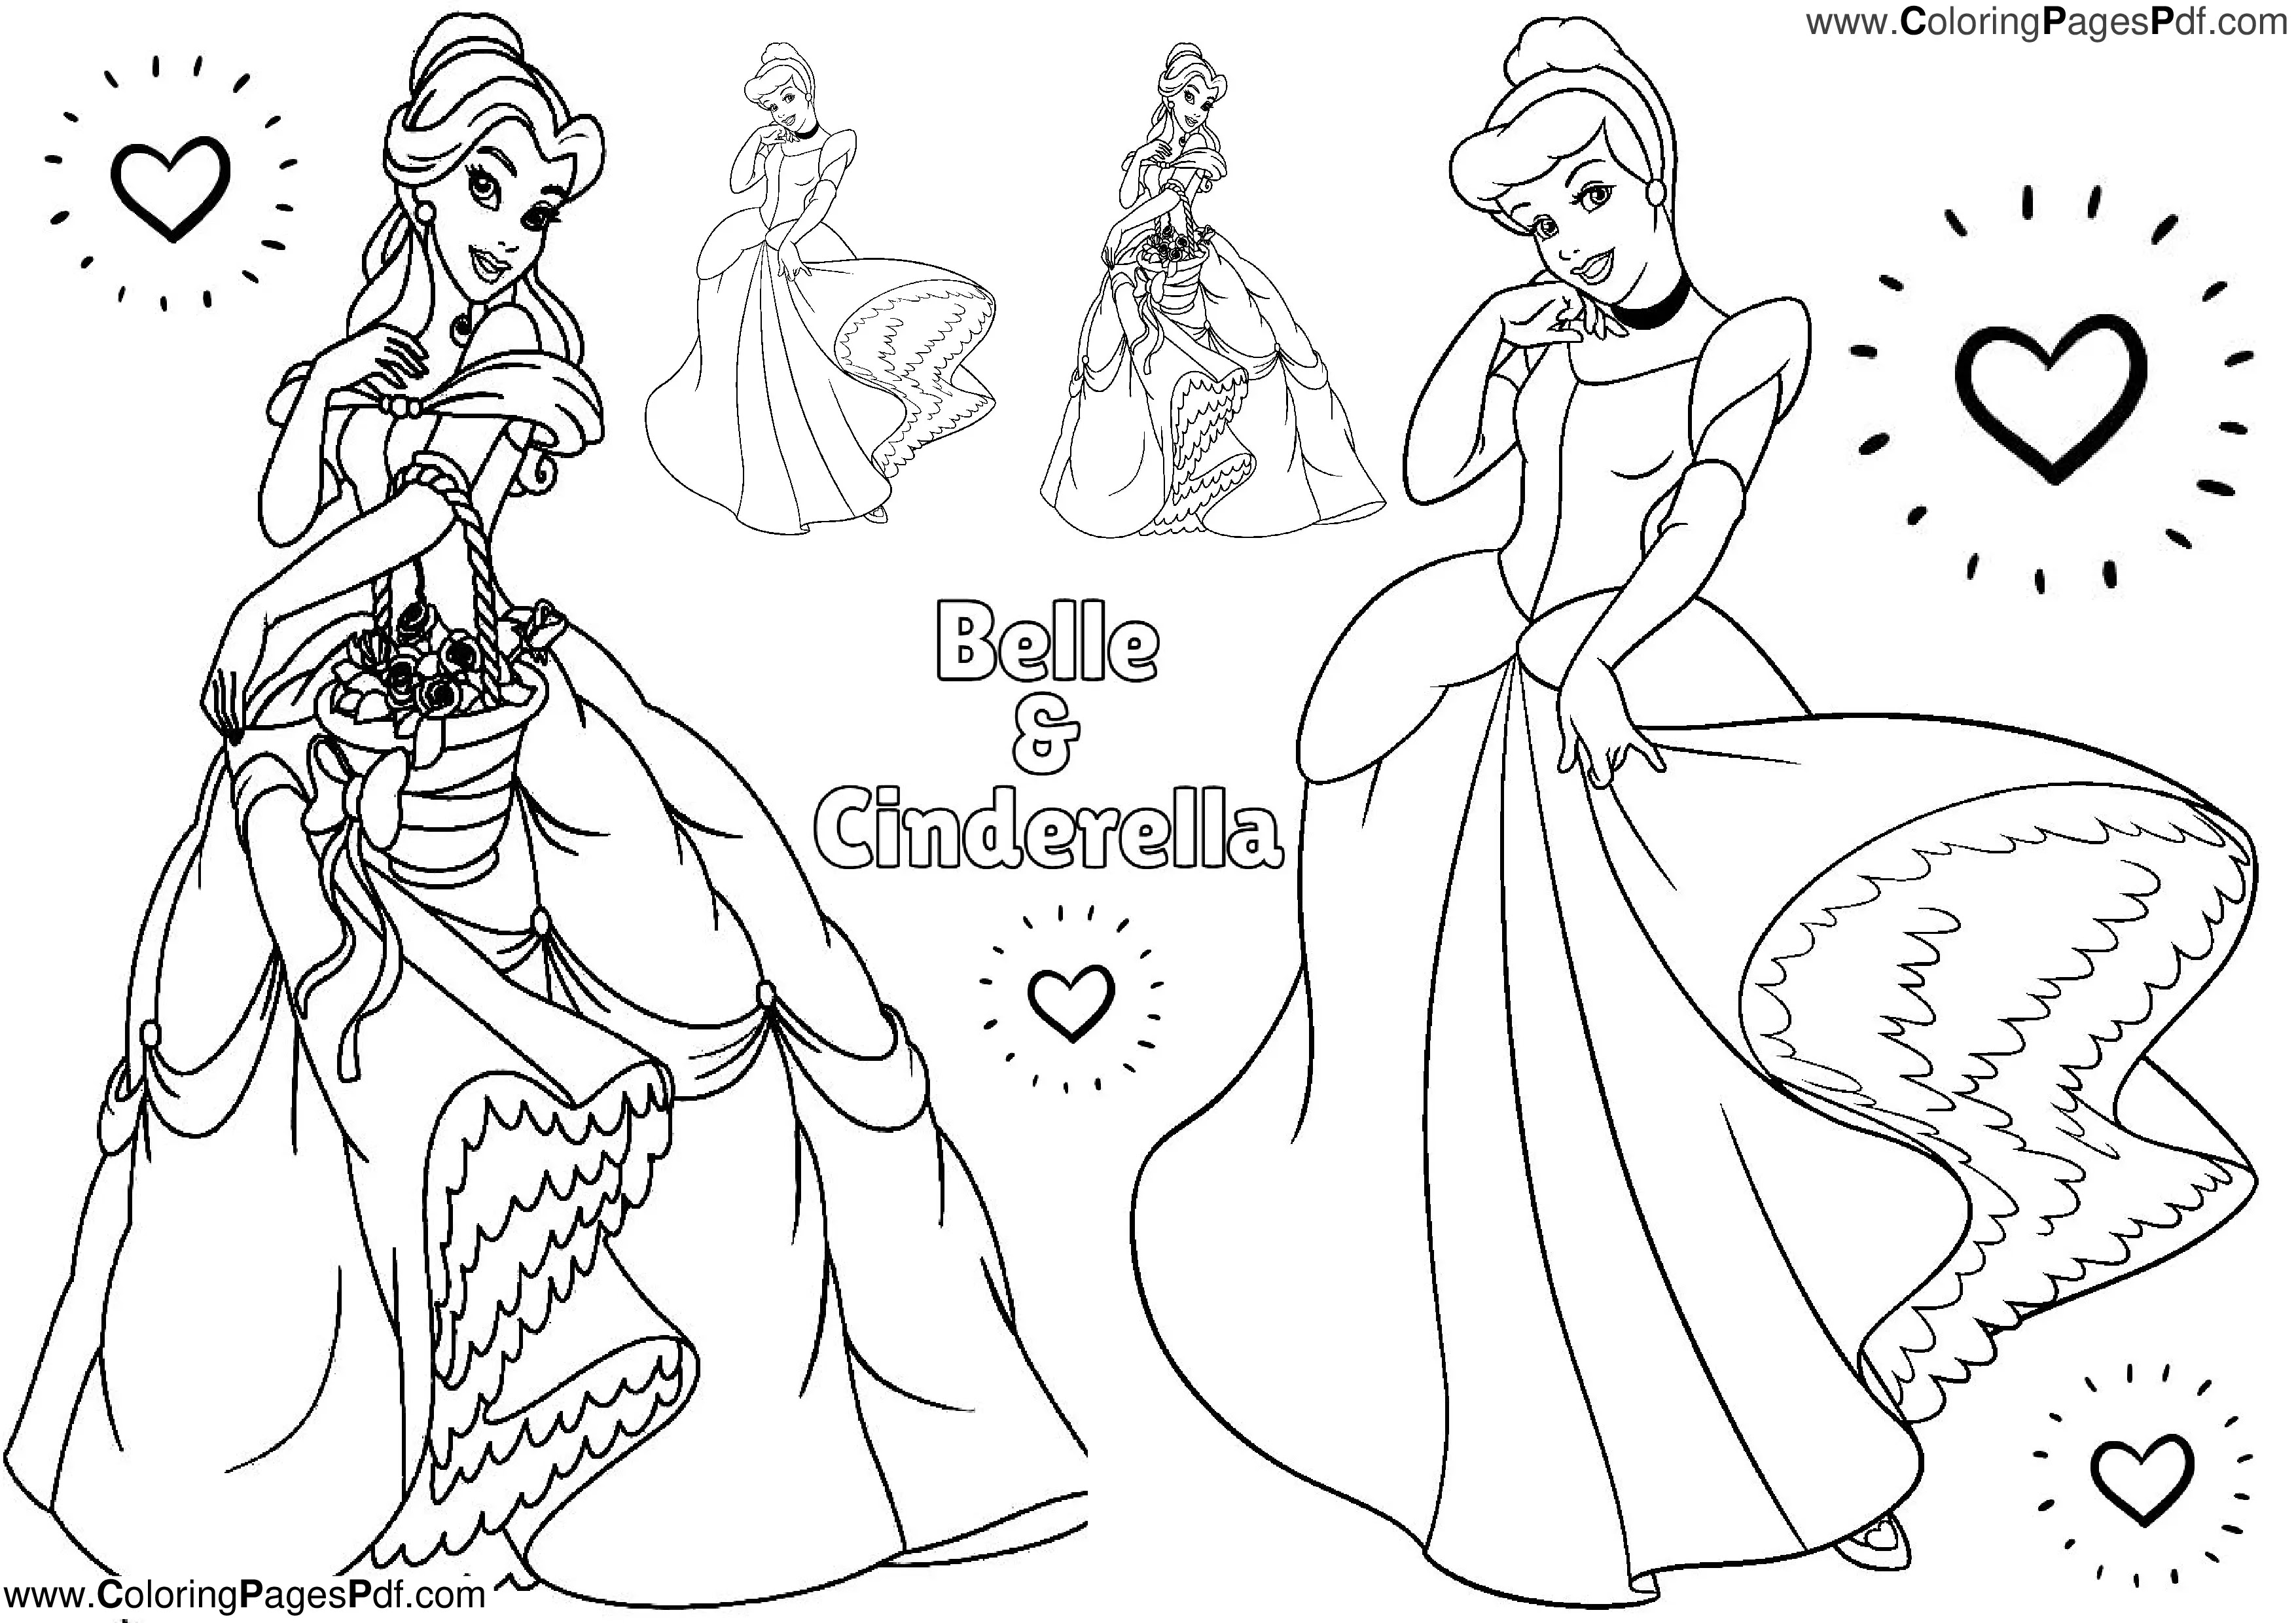 Belle & Cinderella Coloring Pages